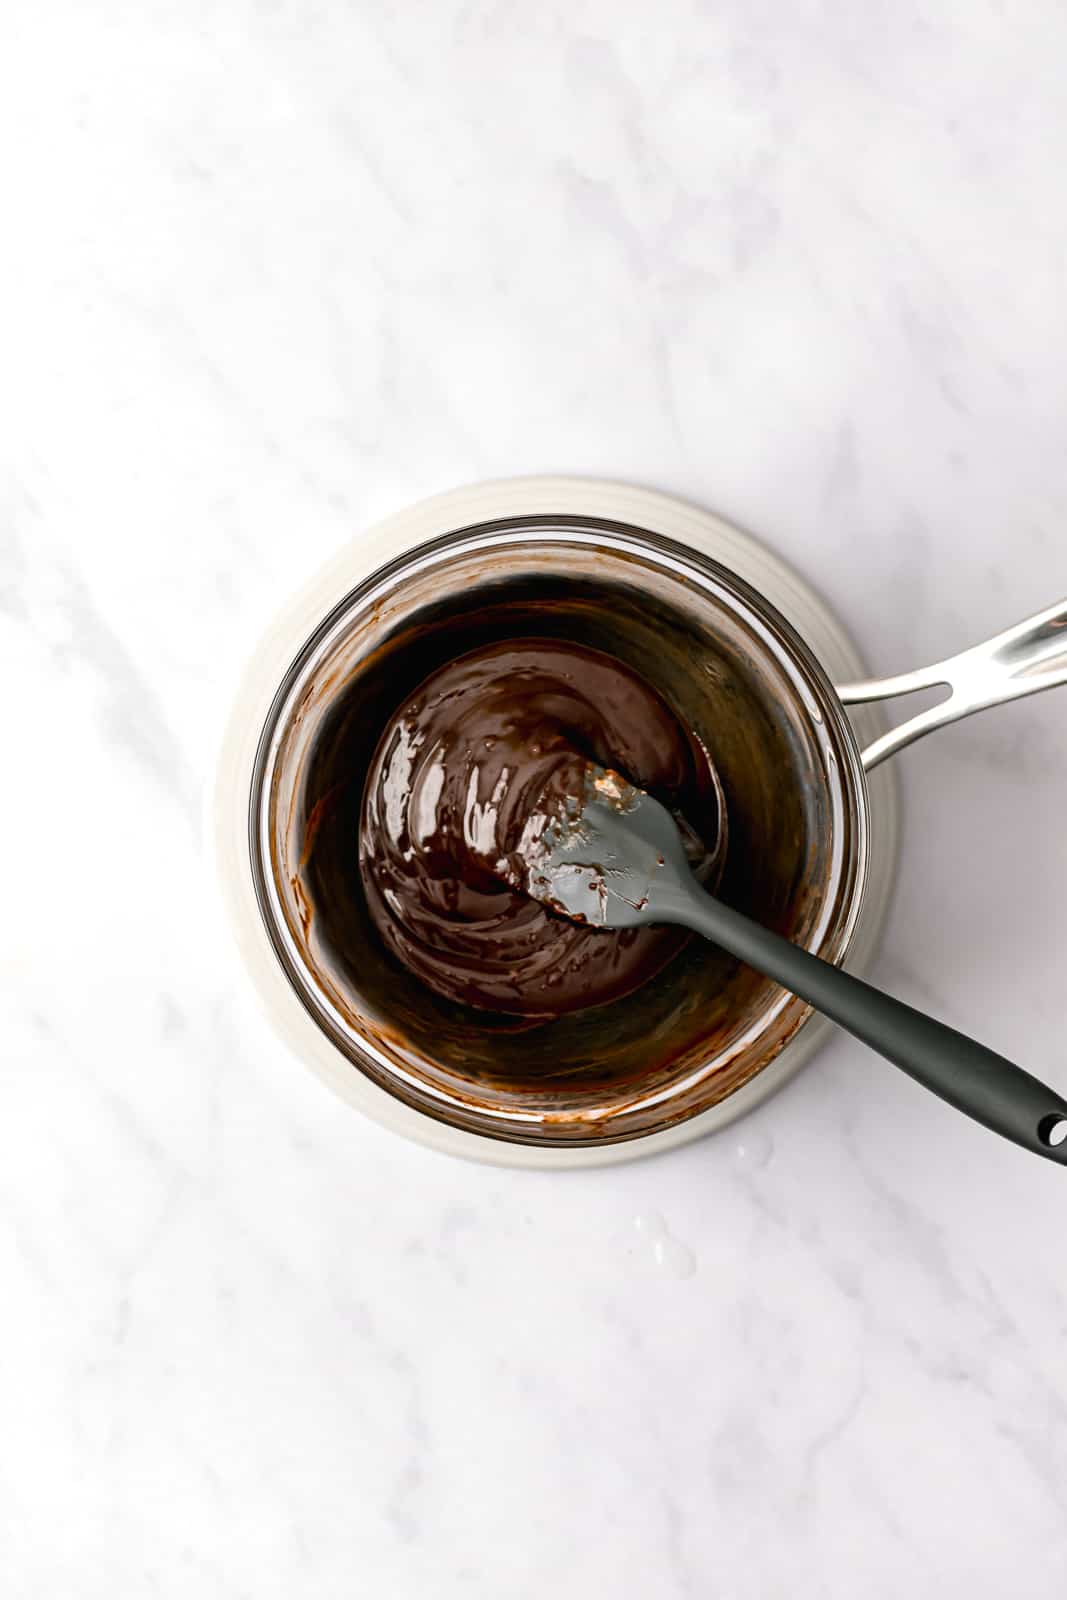 chocolate batter ingredients over a double boiler.